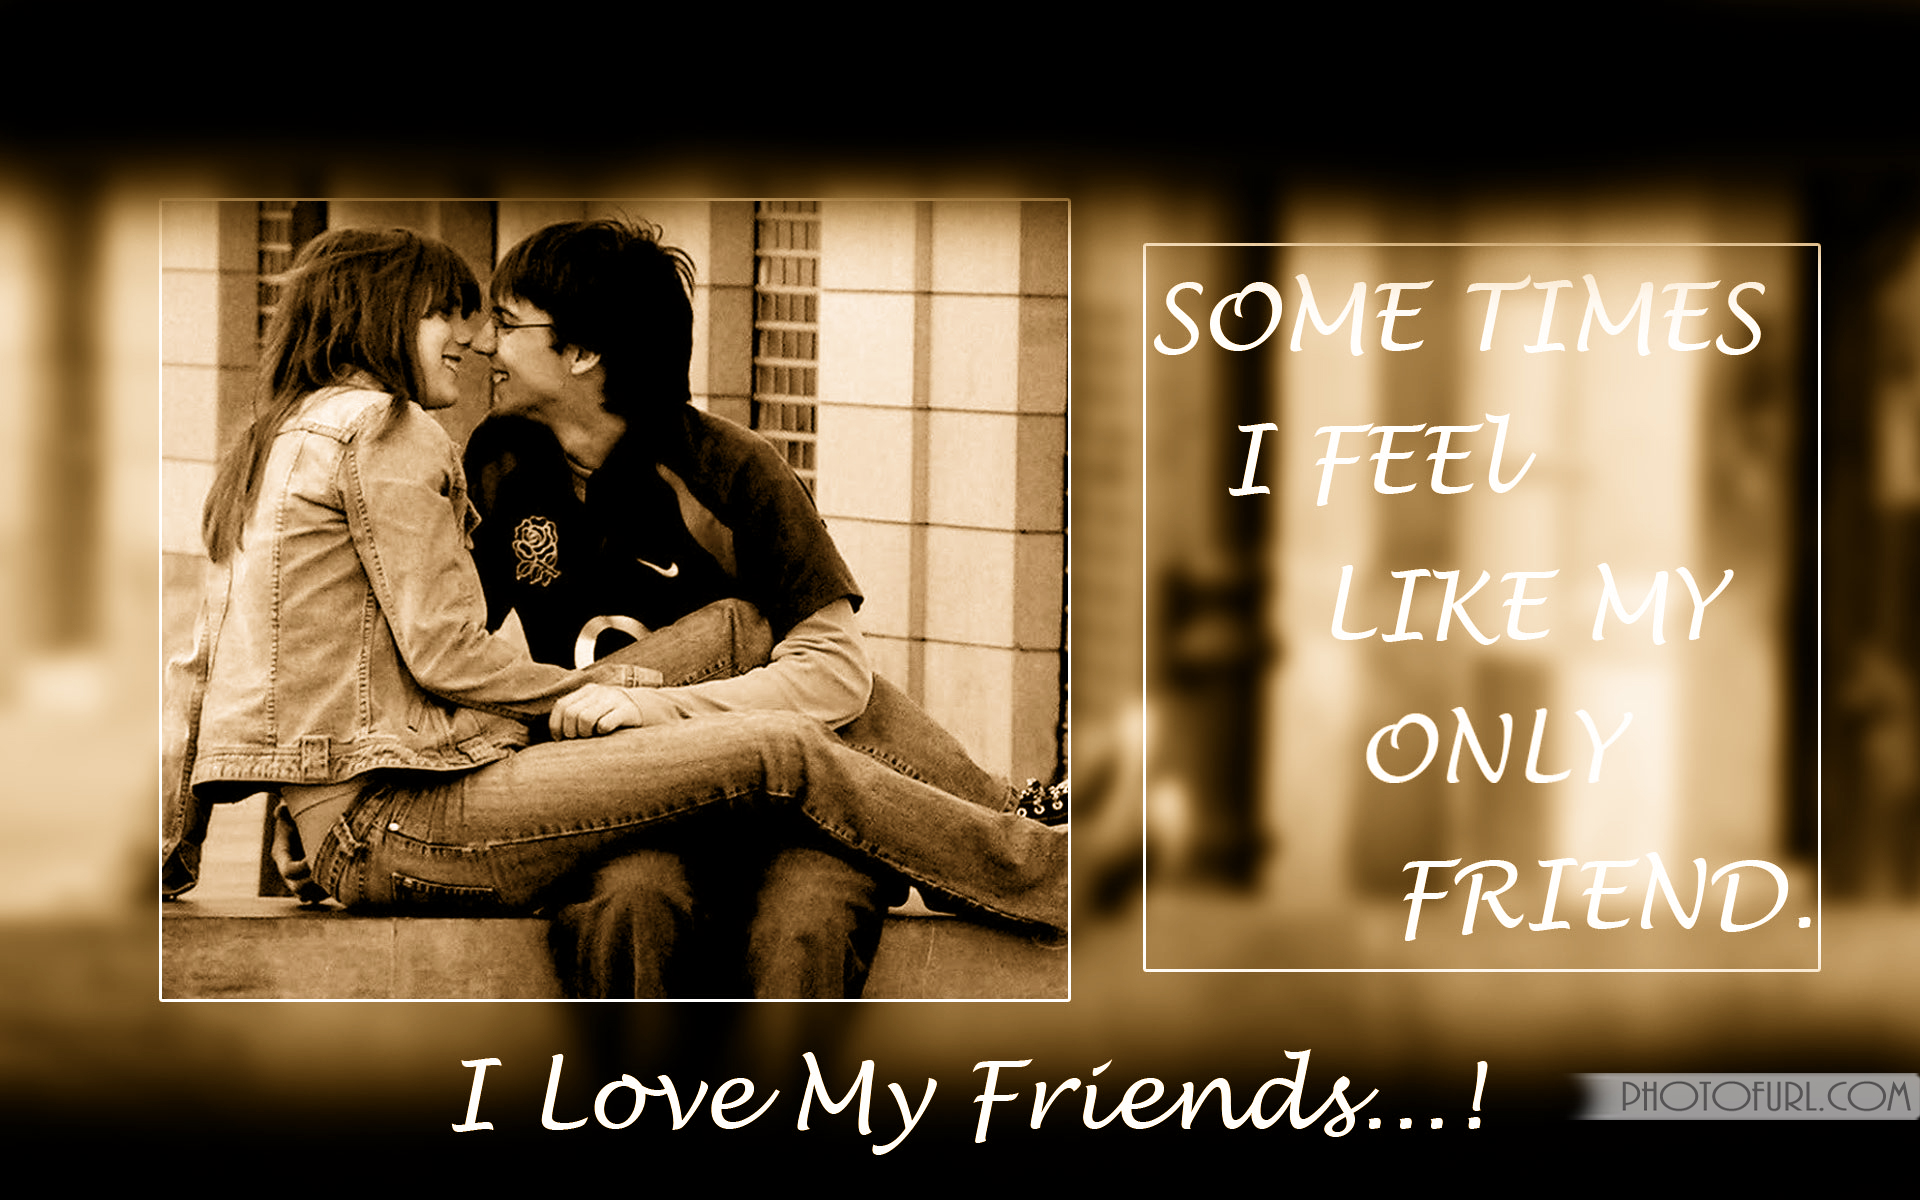 Image For Love - Love Friendship Images Download - 1920x1200 Wallpaper -  